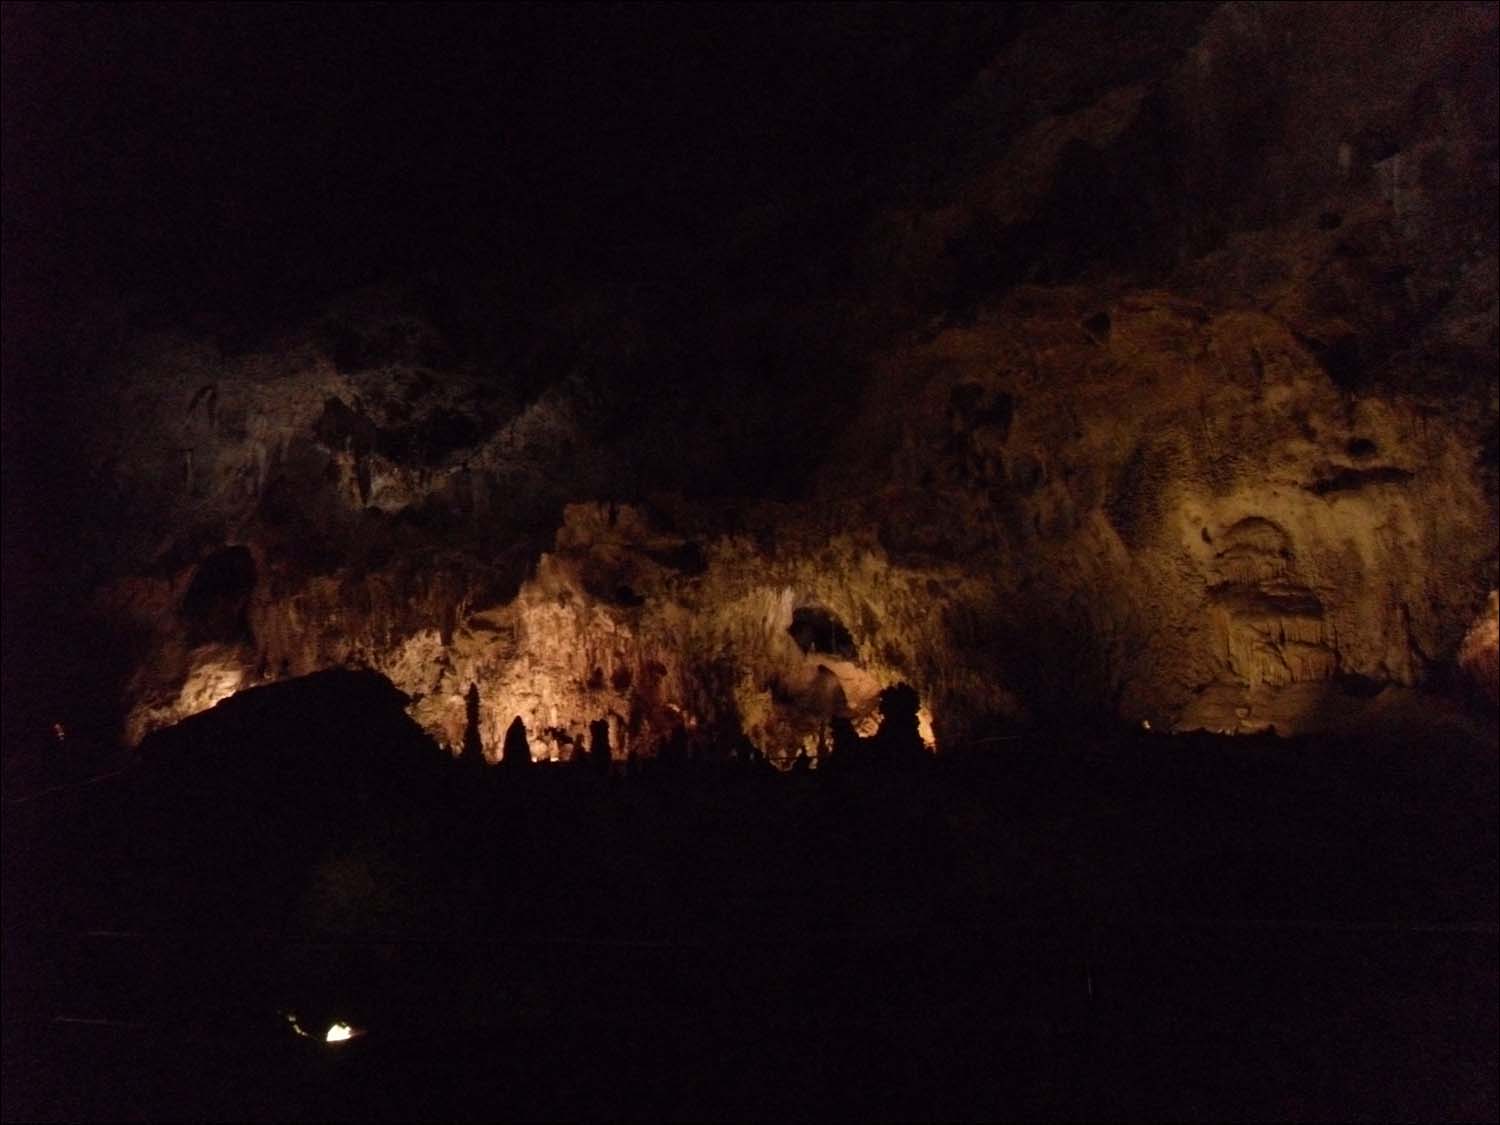 Carlsbad Caverns, NM-The Big Room 755 feet below the surface